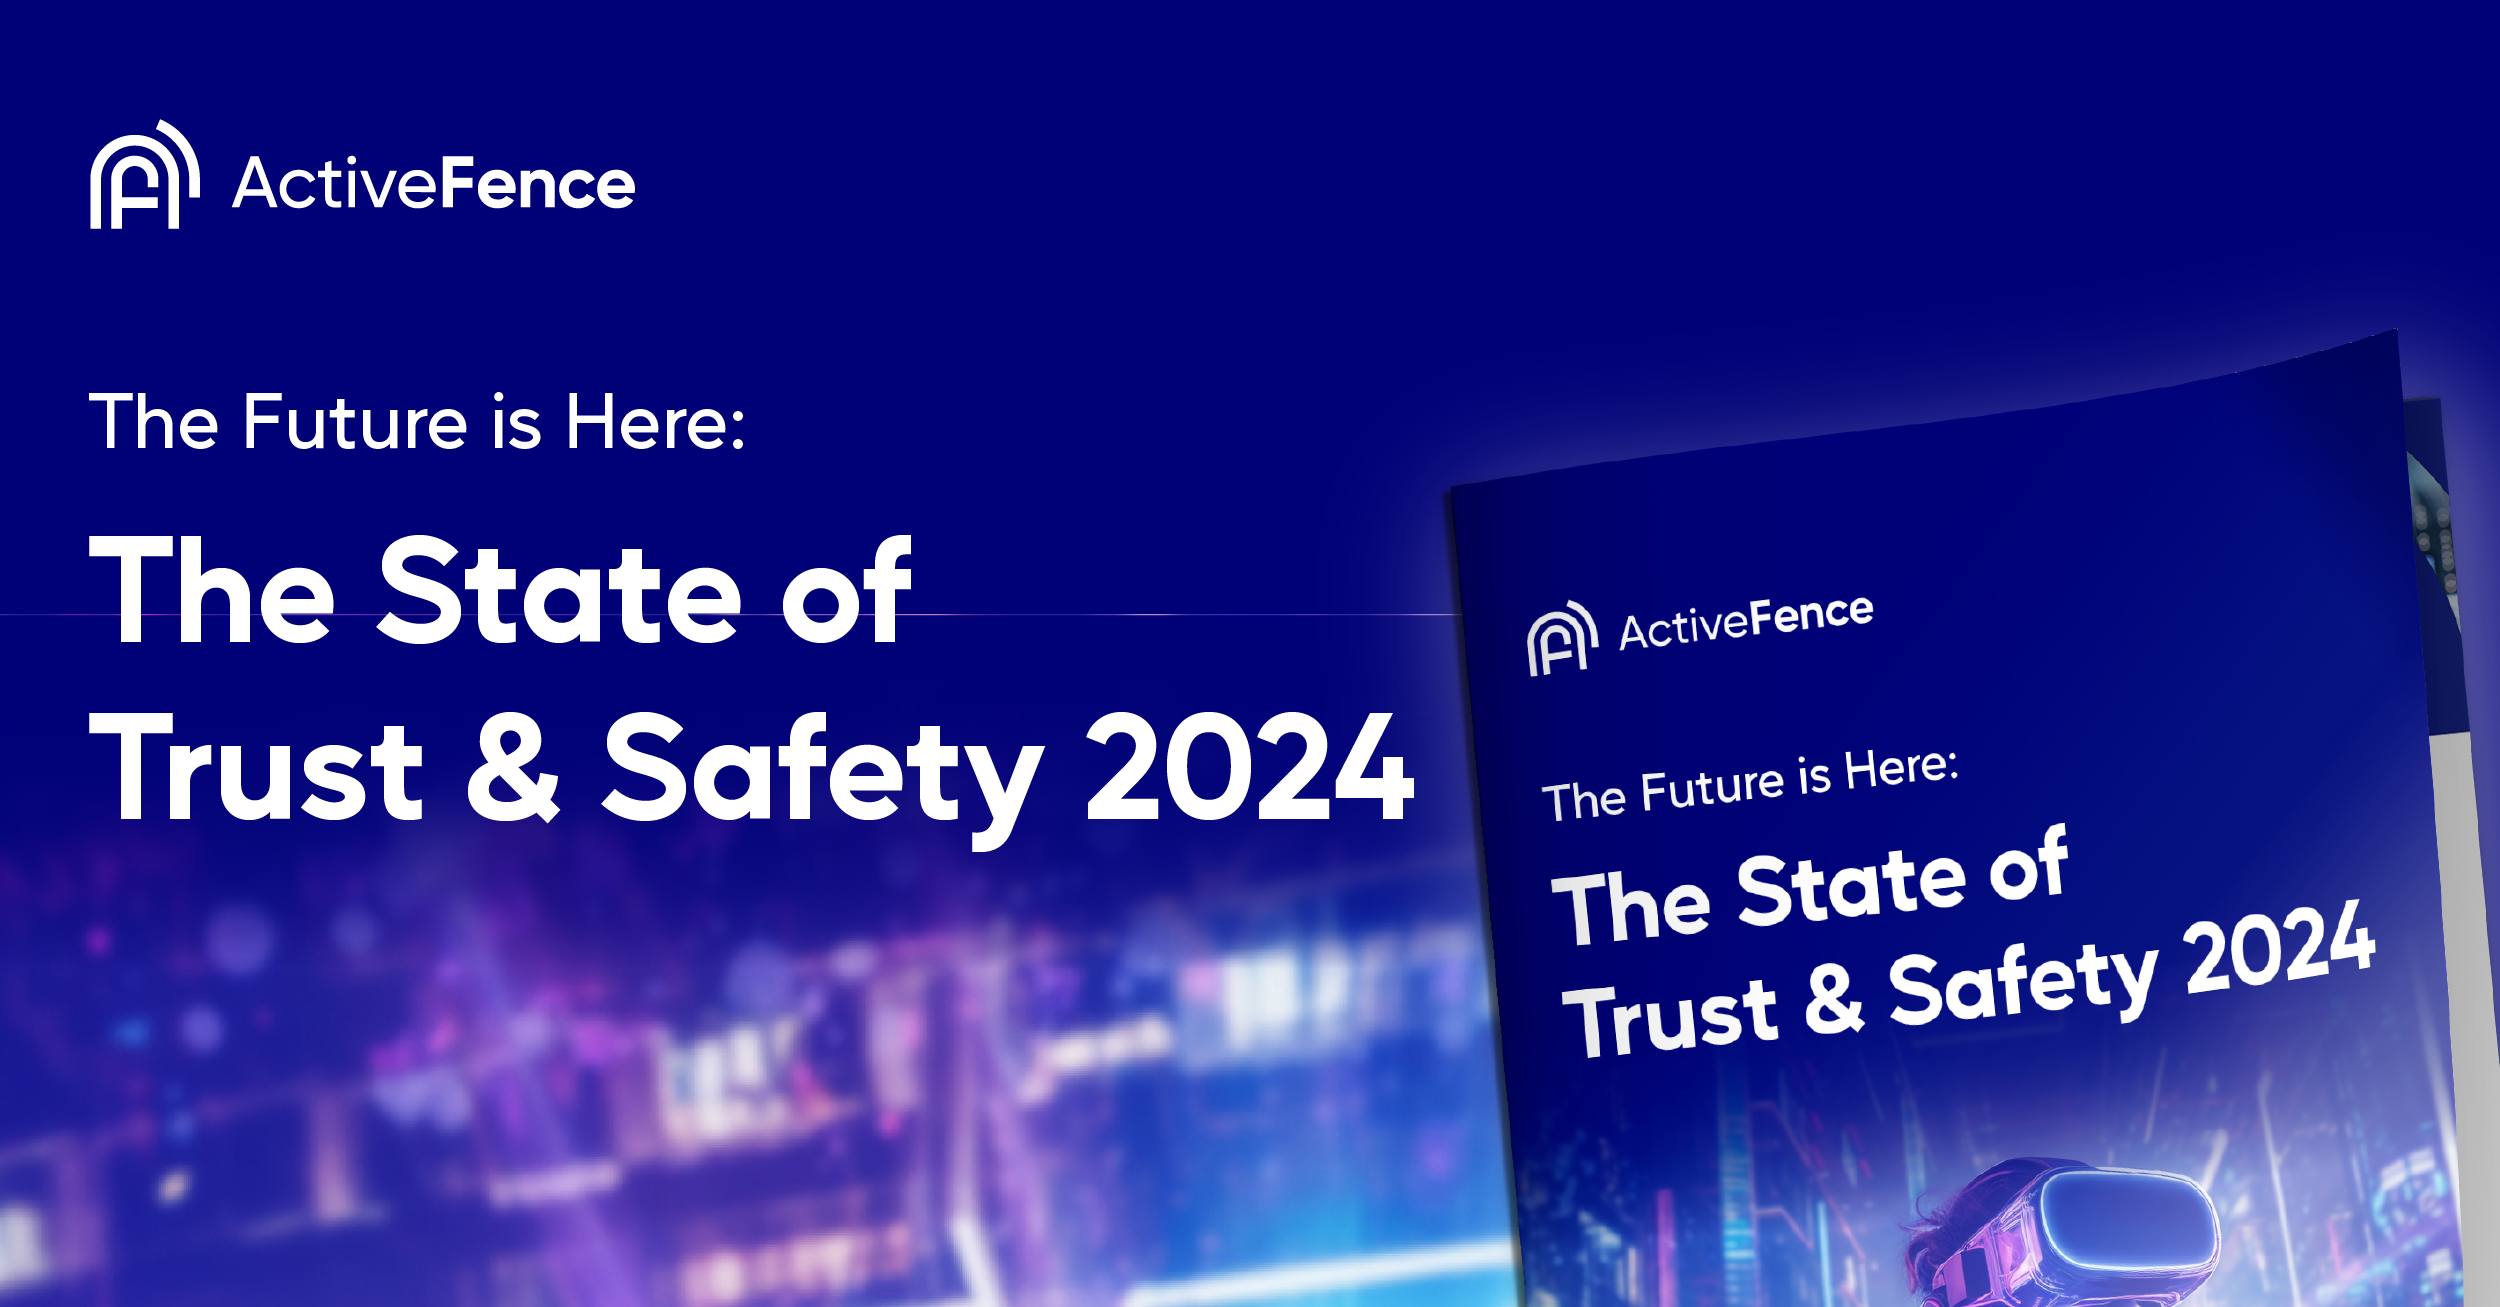 Banner and cover for ActiveFence's report titled 'The Future is Here: The State of Trust & Safety 2024', featuring a cityscape background and a modern, futuristic design.